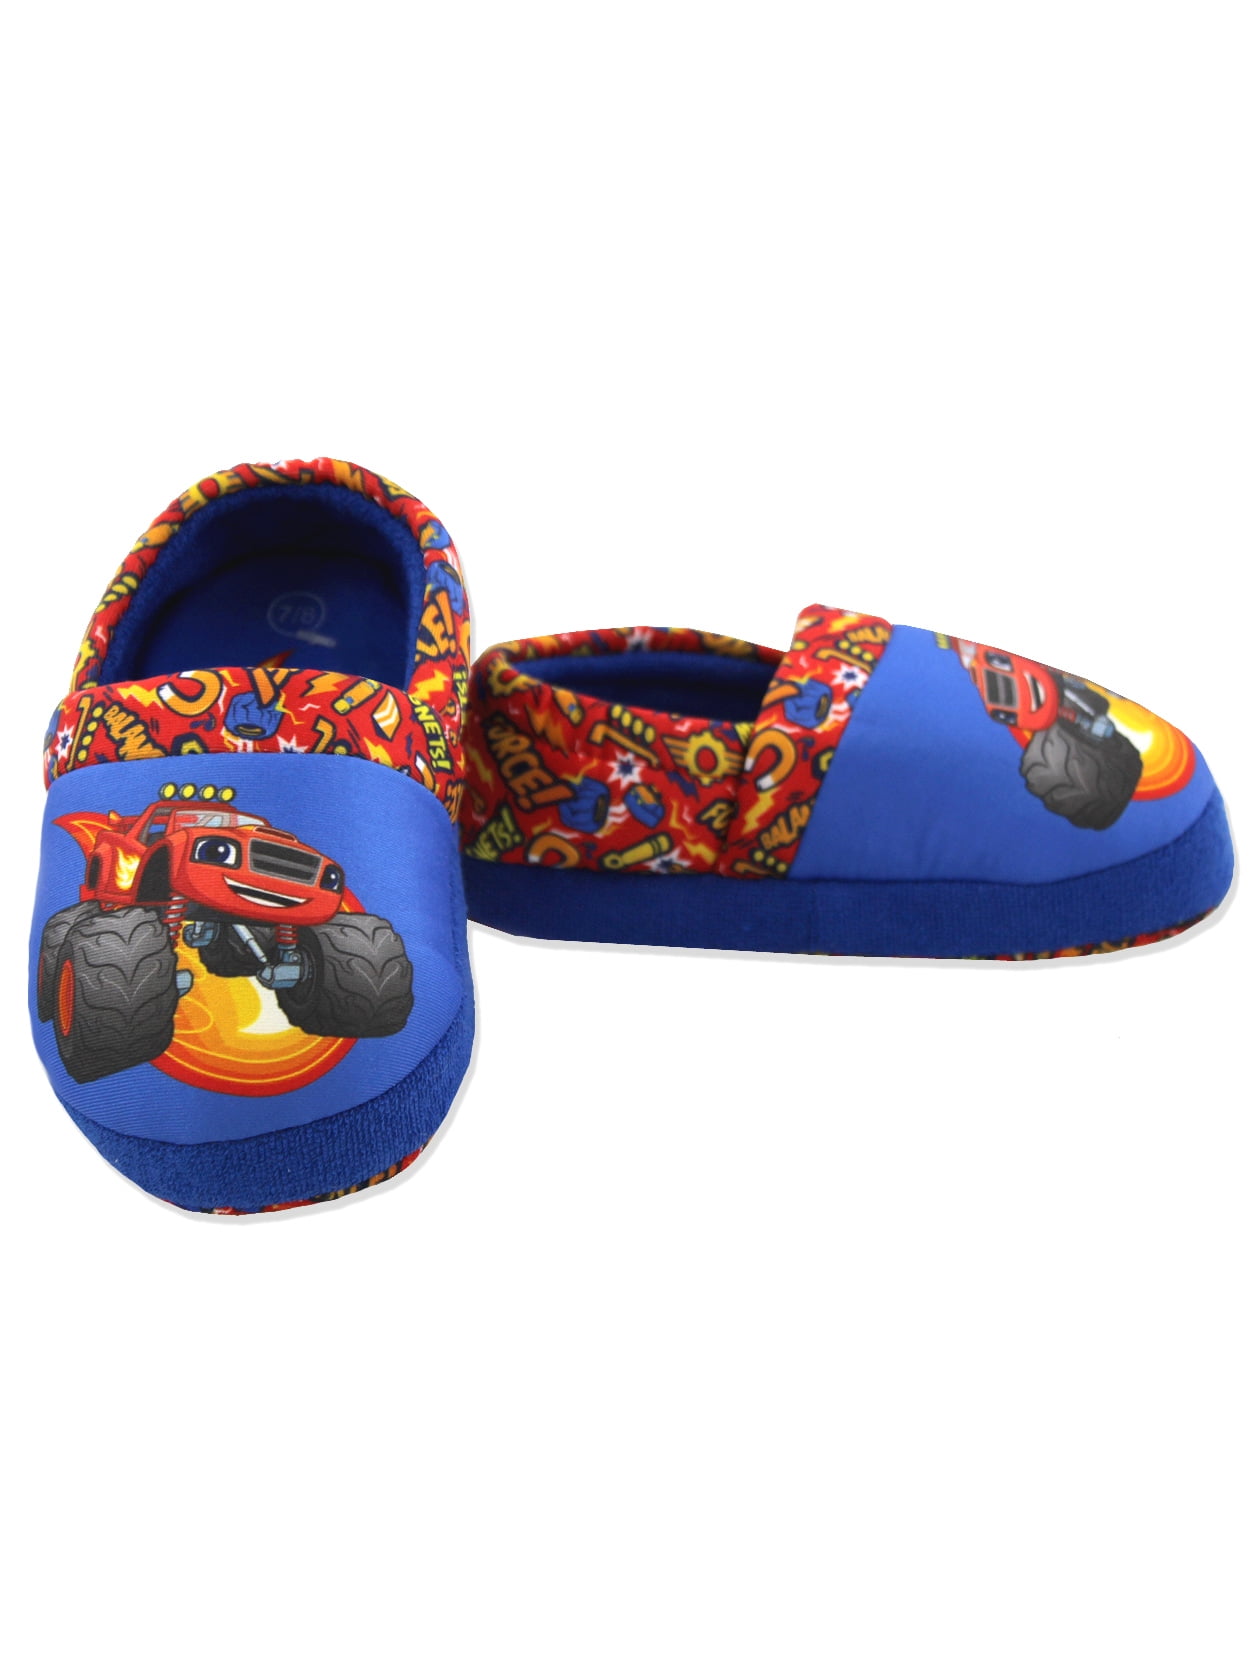 blaze and the monster machine shoes